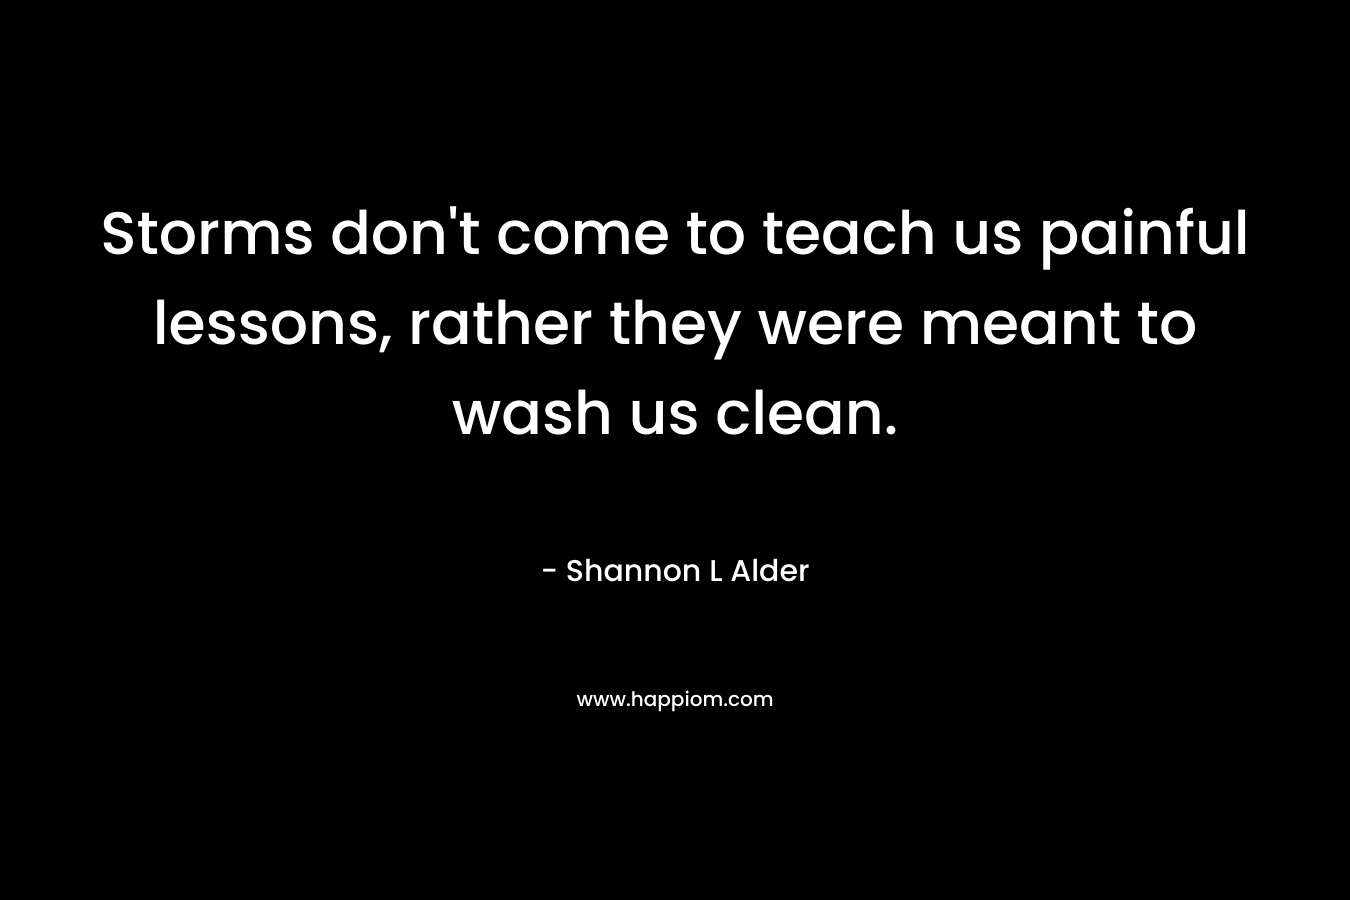 Storms don’t come to teach us painful lessons, rather they were meant to wash us clean. – Shannon L Alder